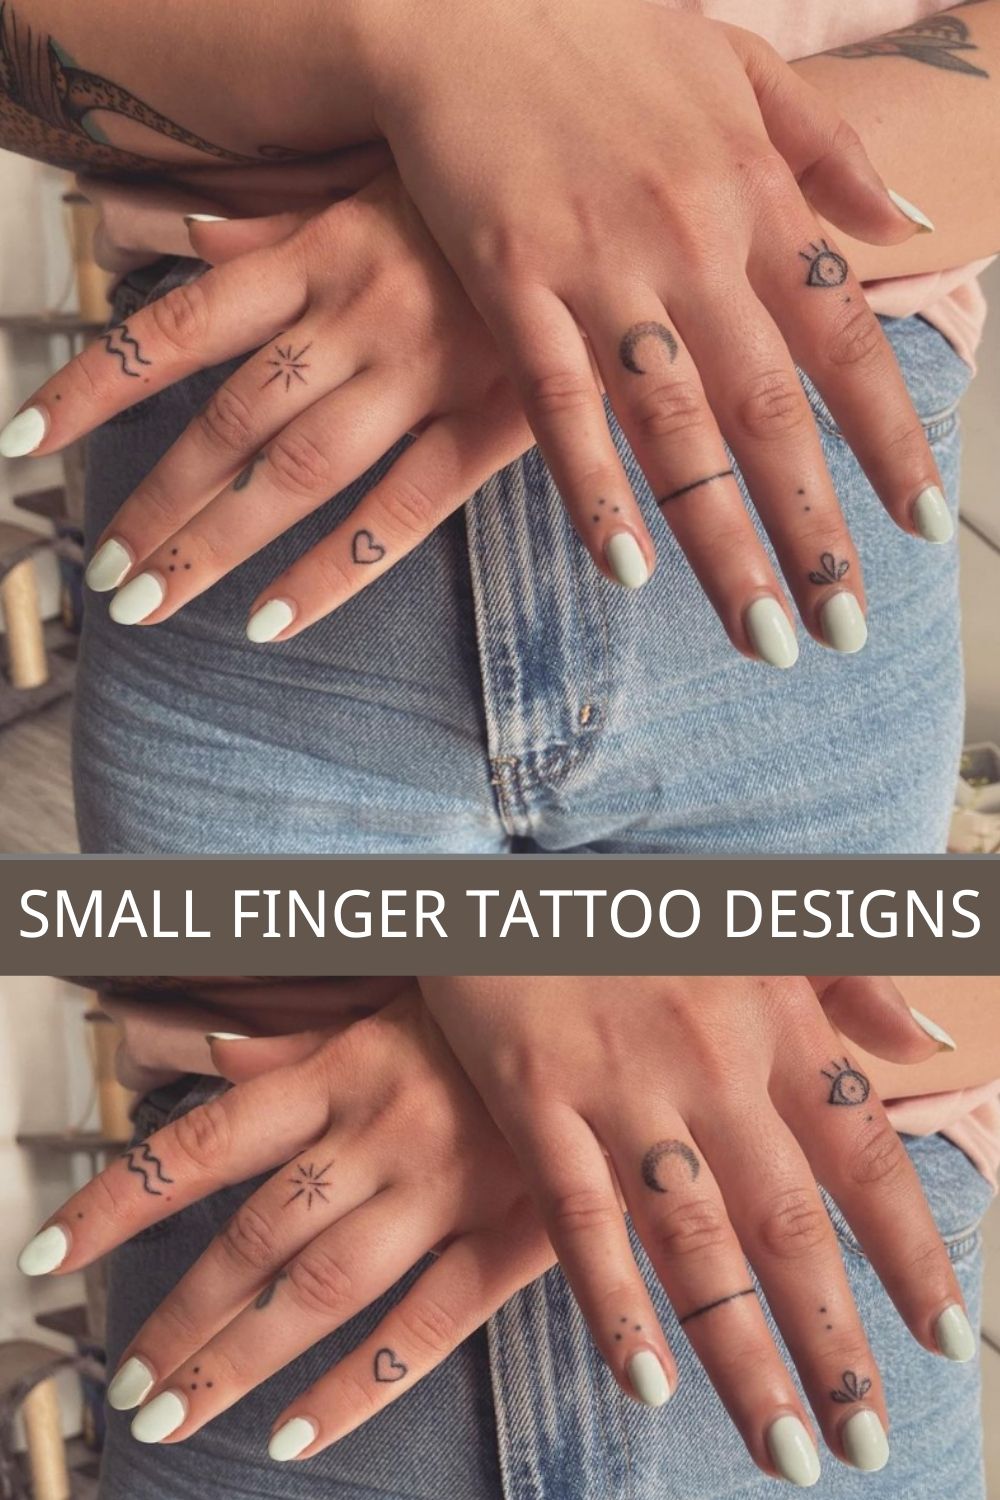 Best Small Finger Tattoo Design You'll Love To Try!